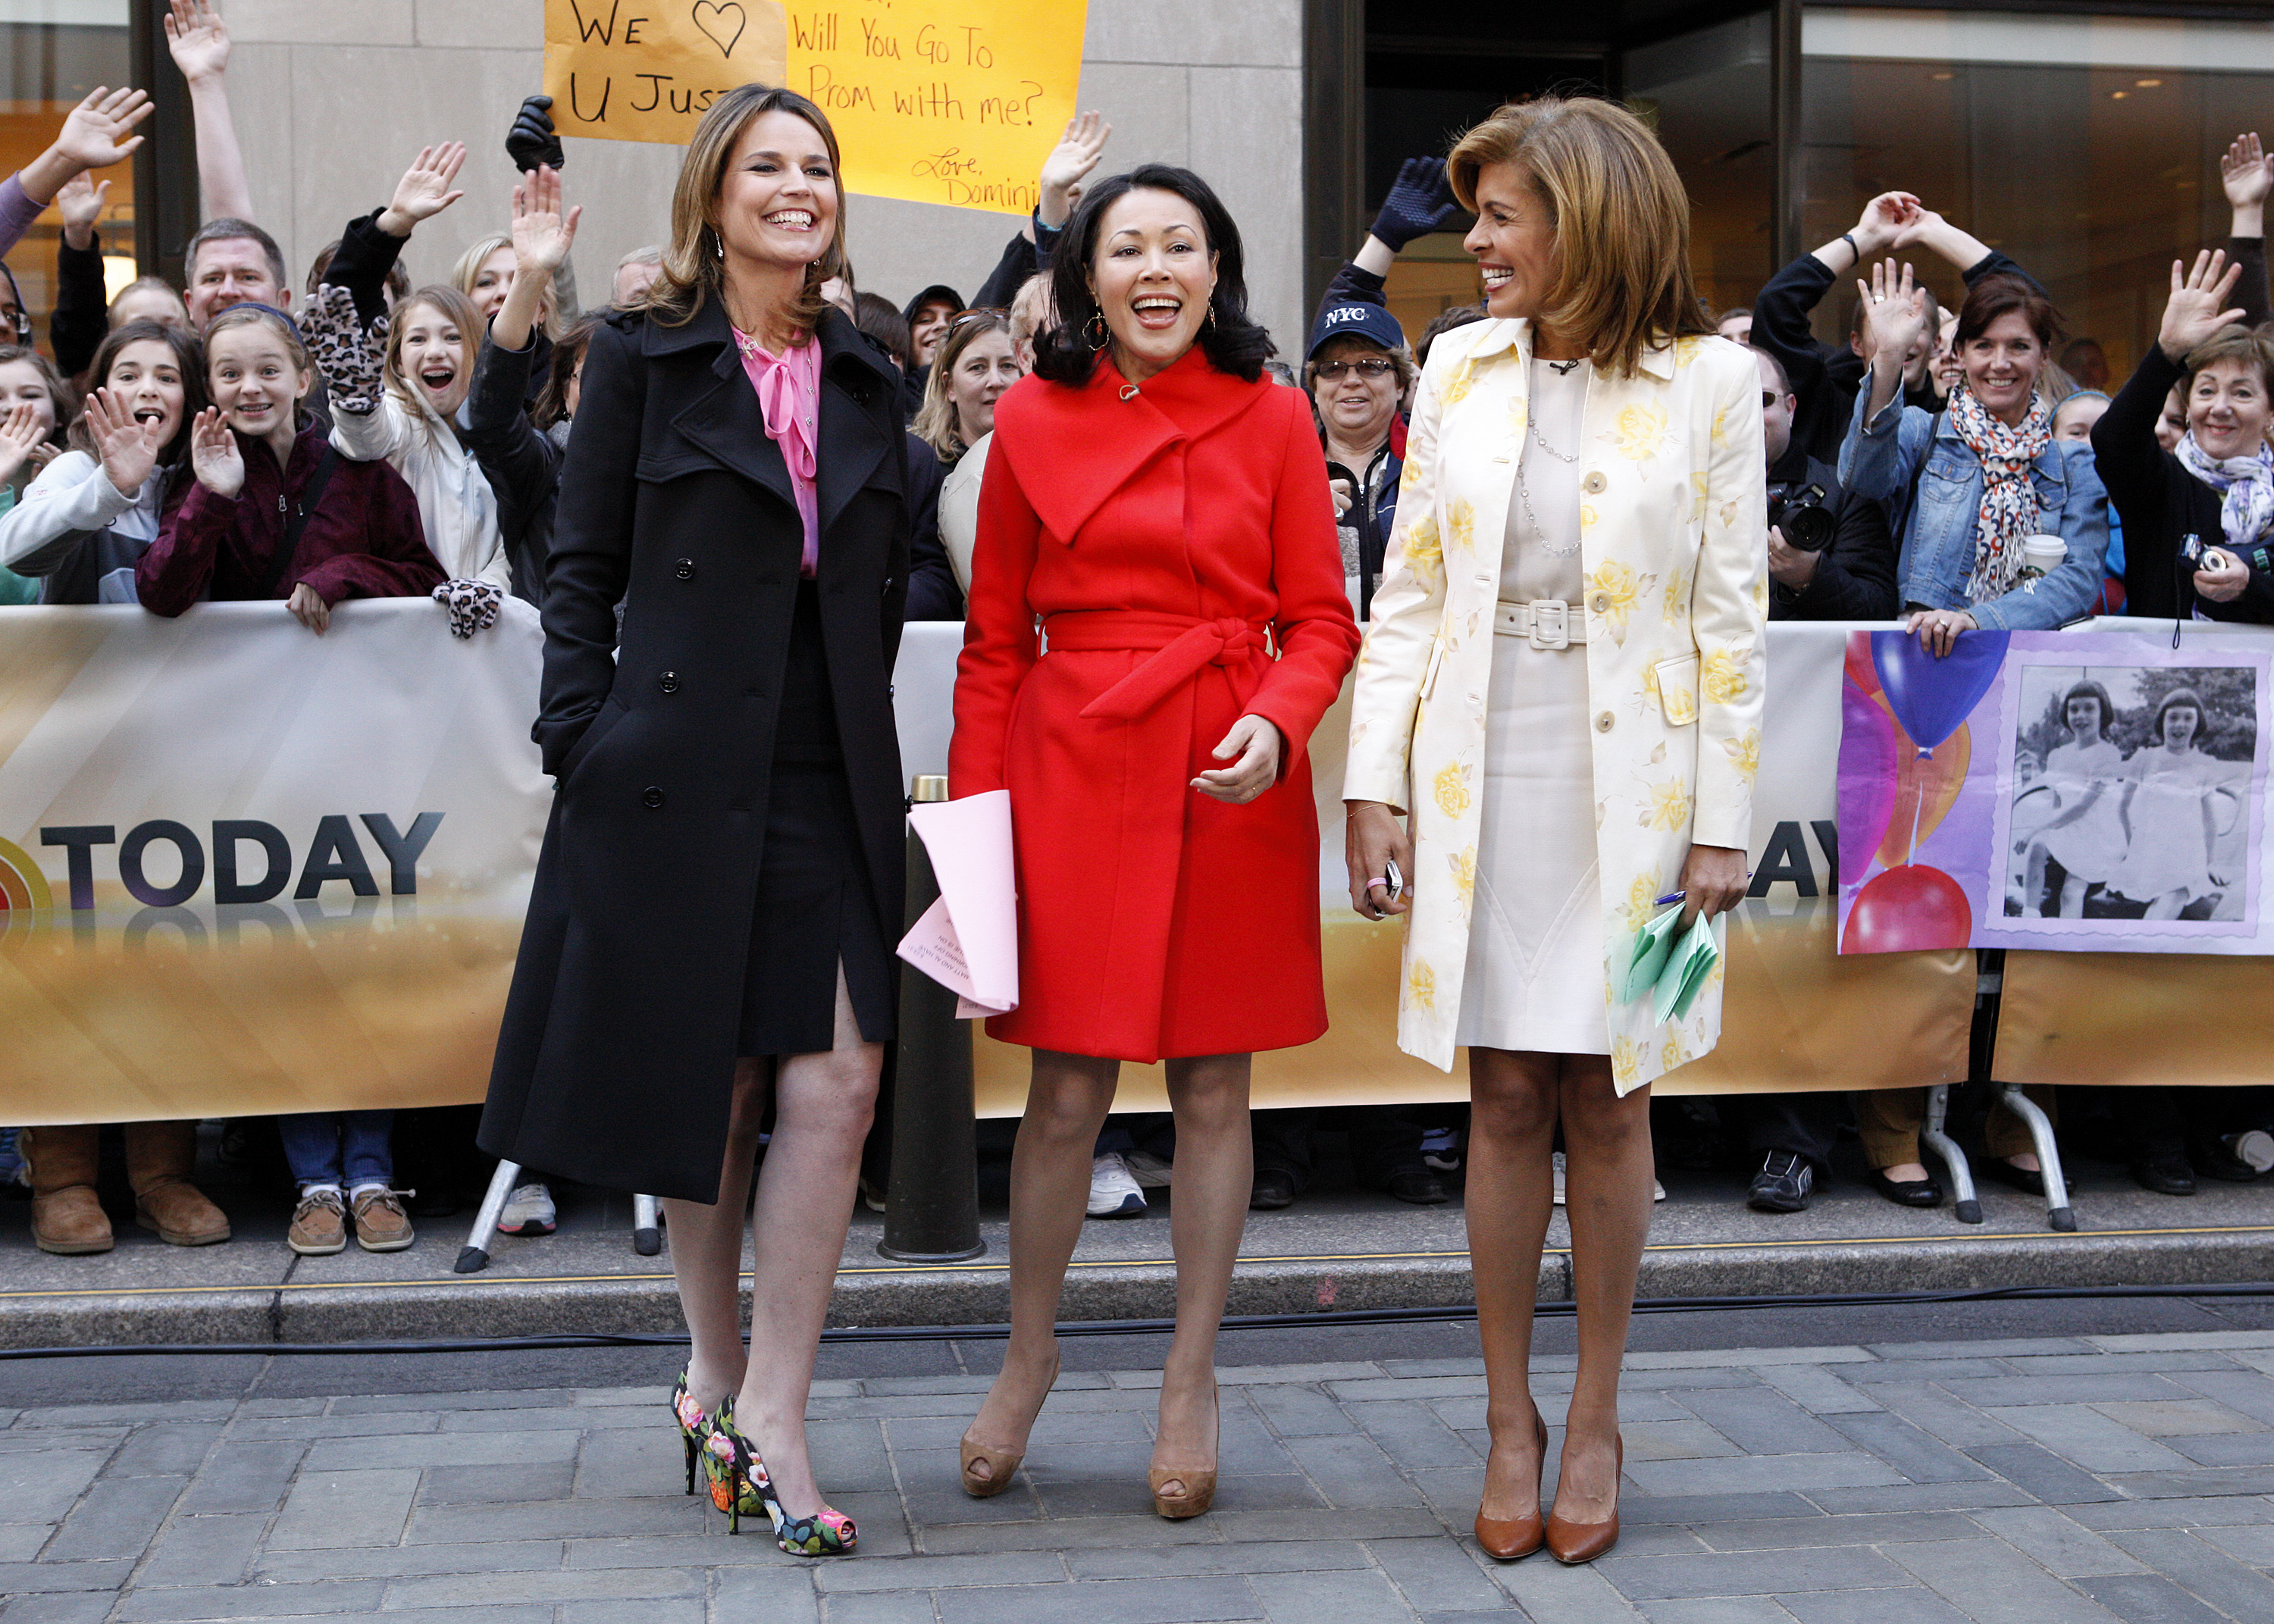 Ann Curry Today Show Getty Images